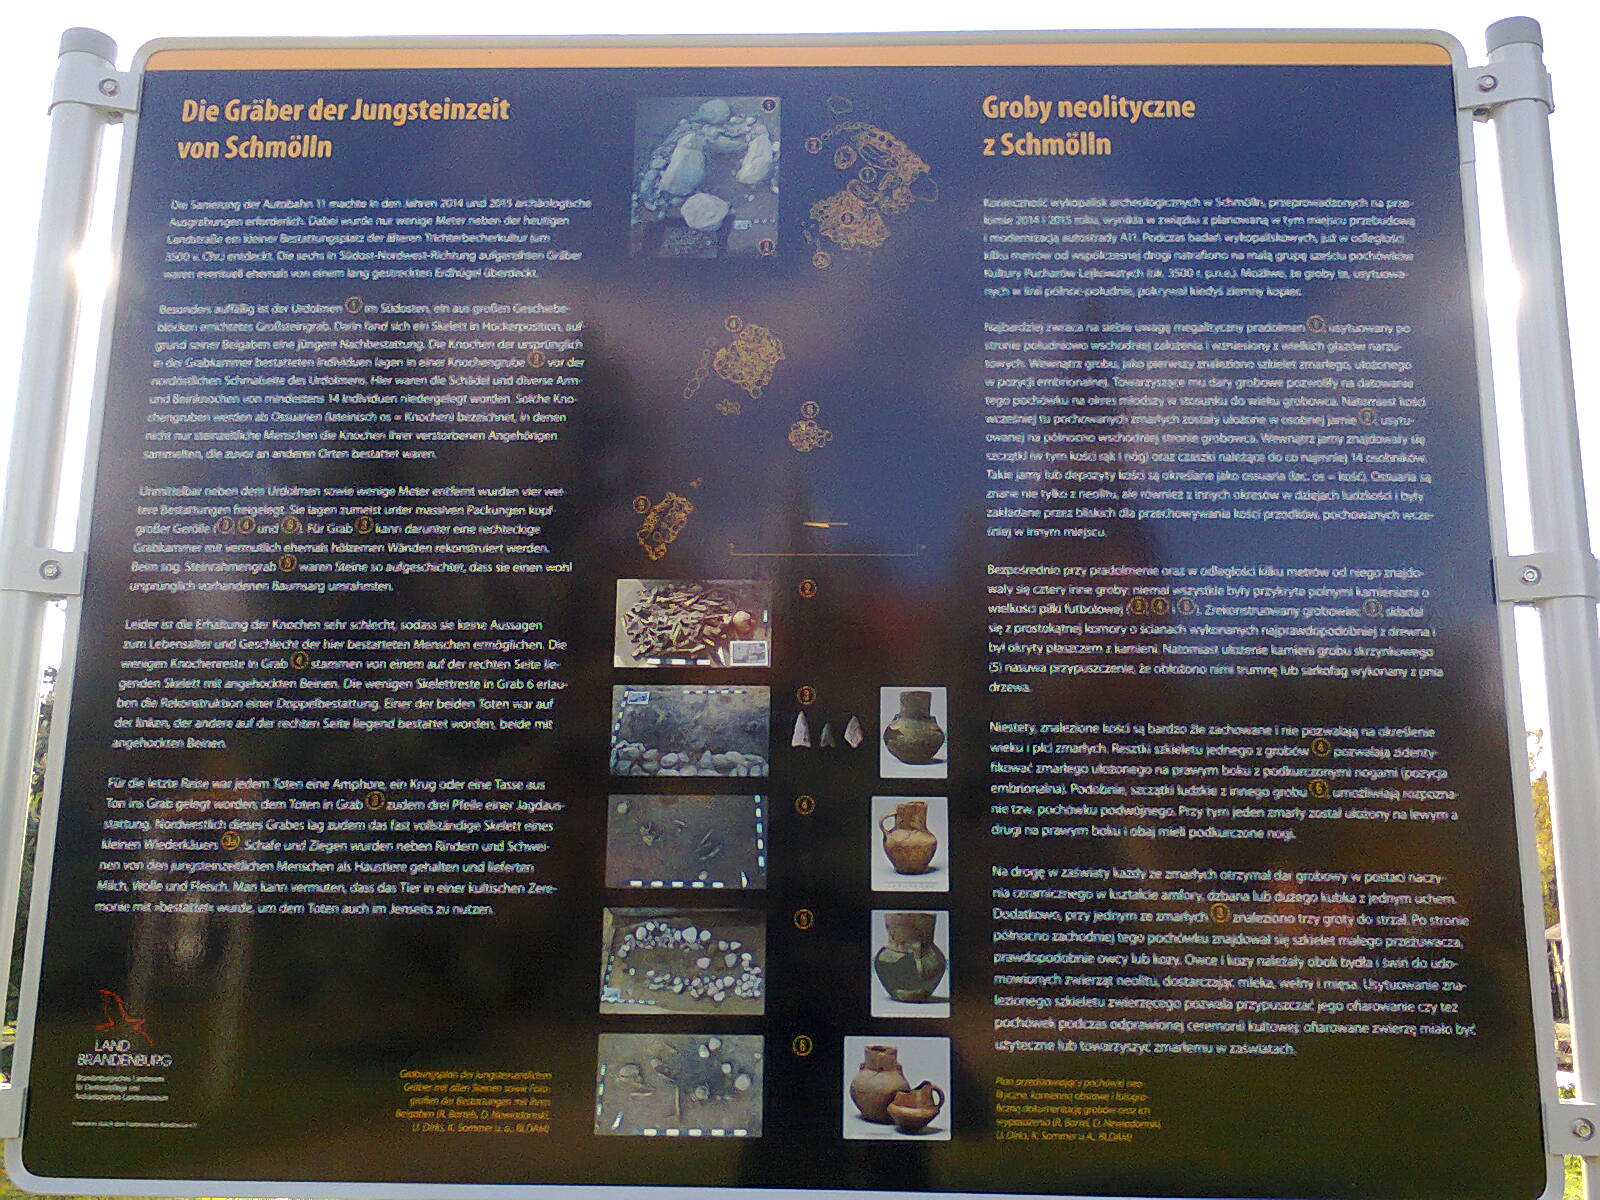 Infoboard in the village schmölln about the excavation.

Picture by Bøddel 30/10-2016